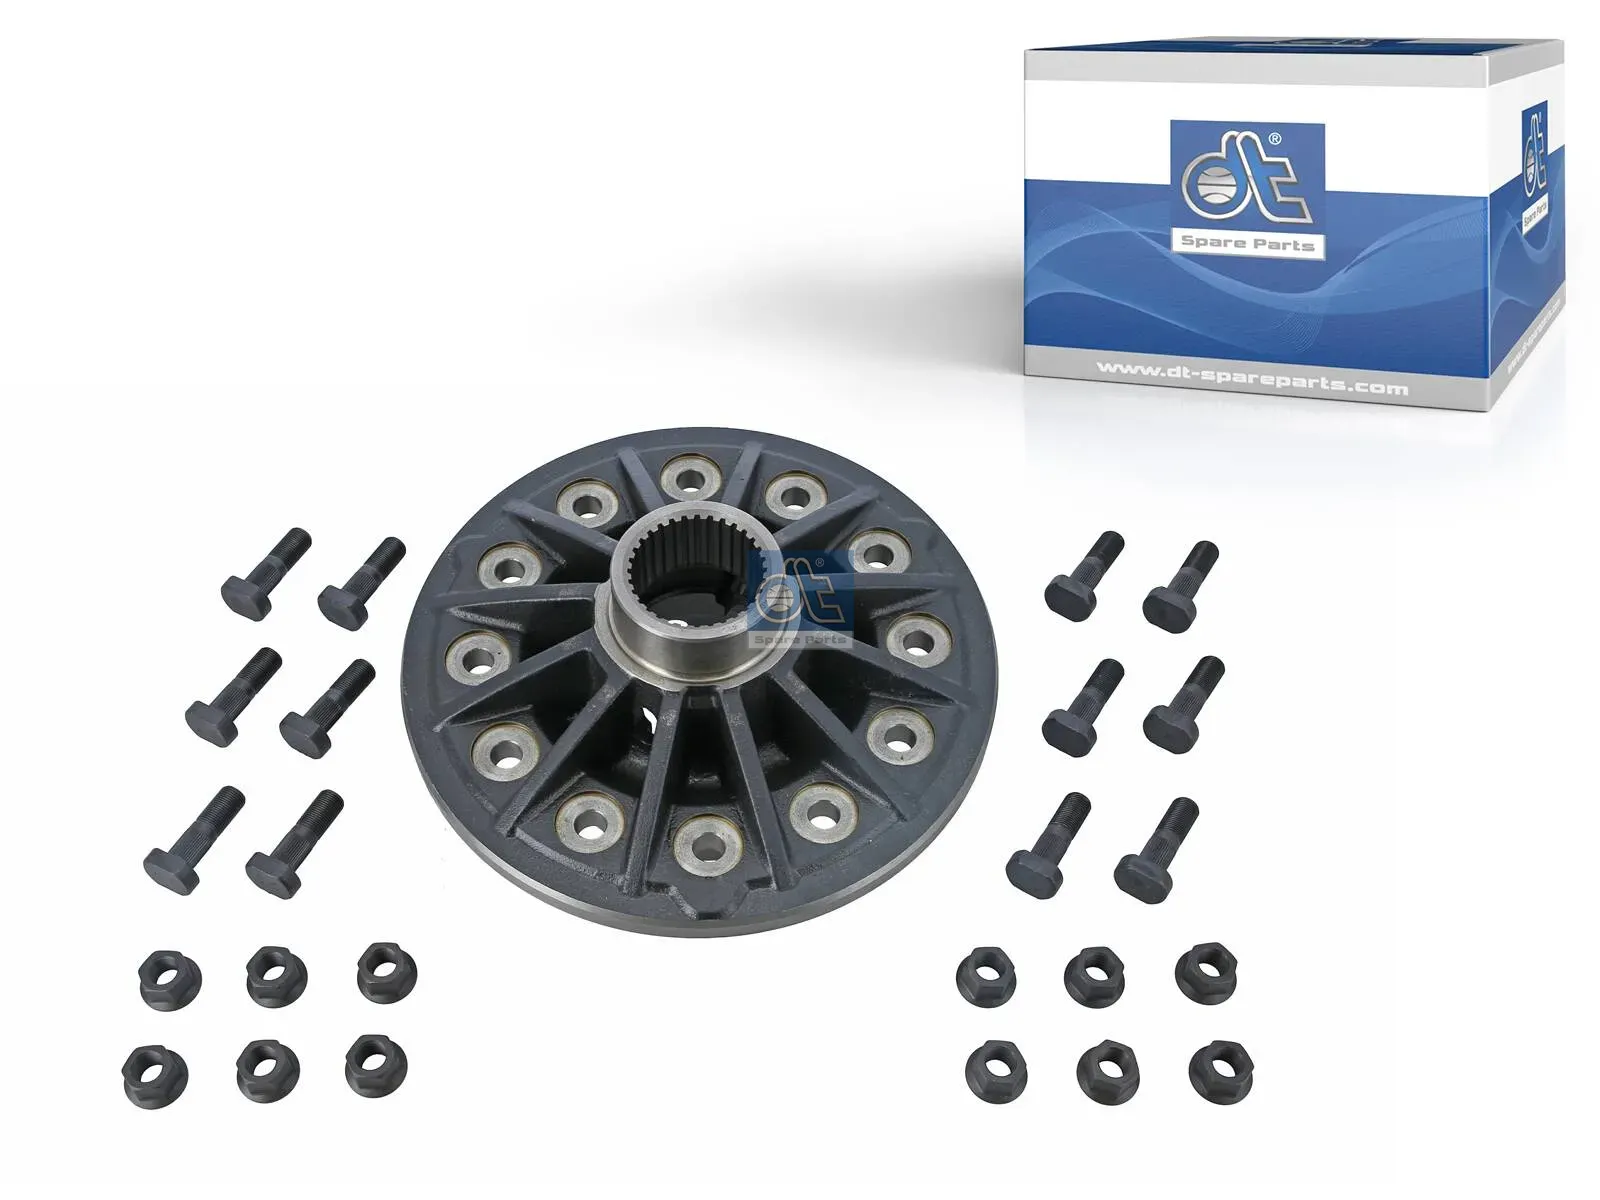 Differential kit